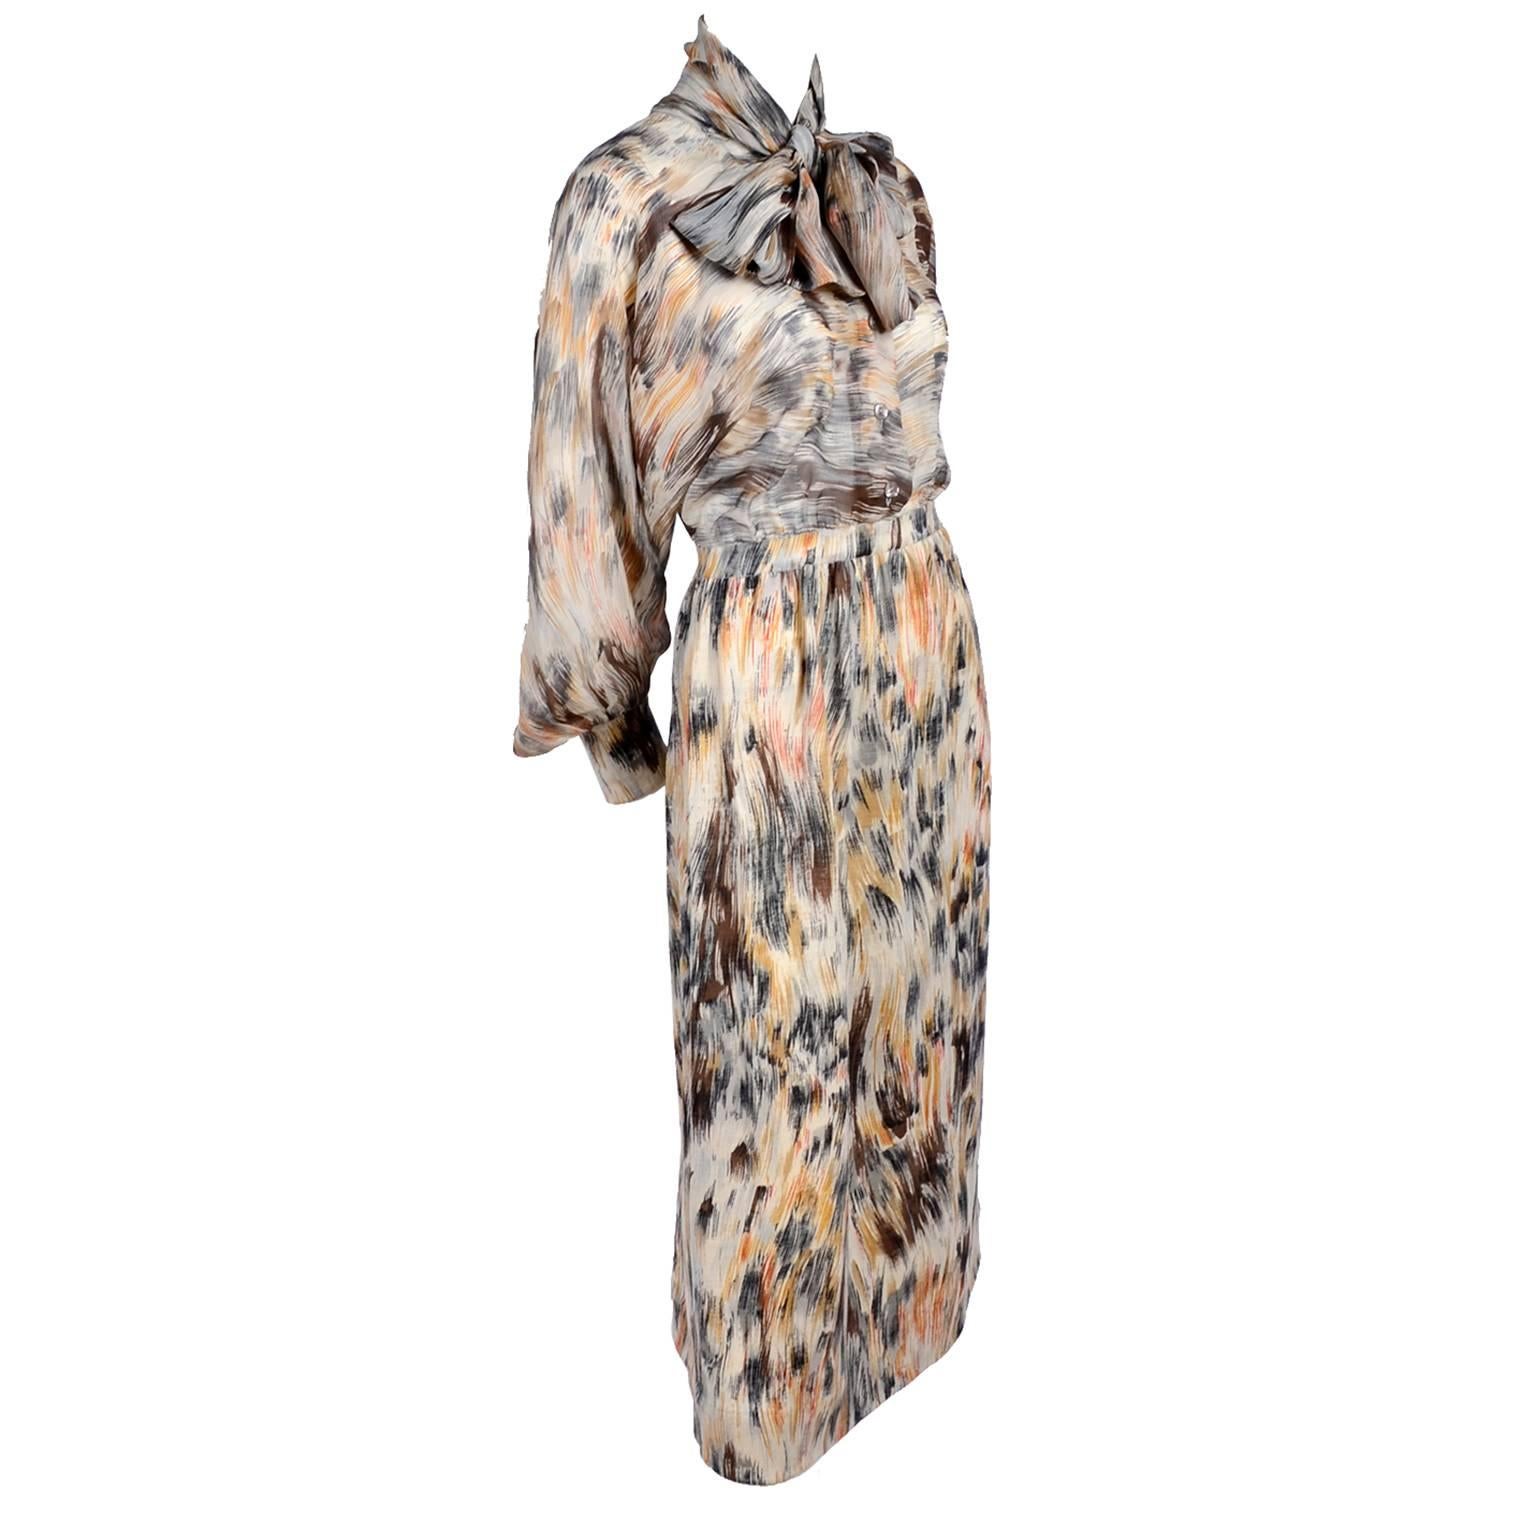 This is an incredible vintage Goldworm dress with a beautiful sheer silk bodice, wool cuffs, and a wool skirt.  The abstract print is in shades of brown, copper, and gray. There is an attached scarf to the bodice and beautiful dolman sleeves. This